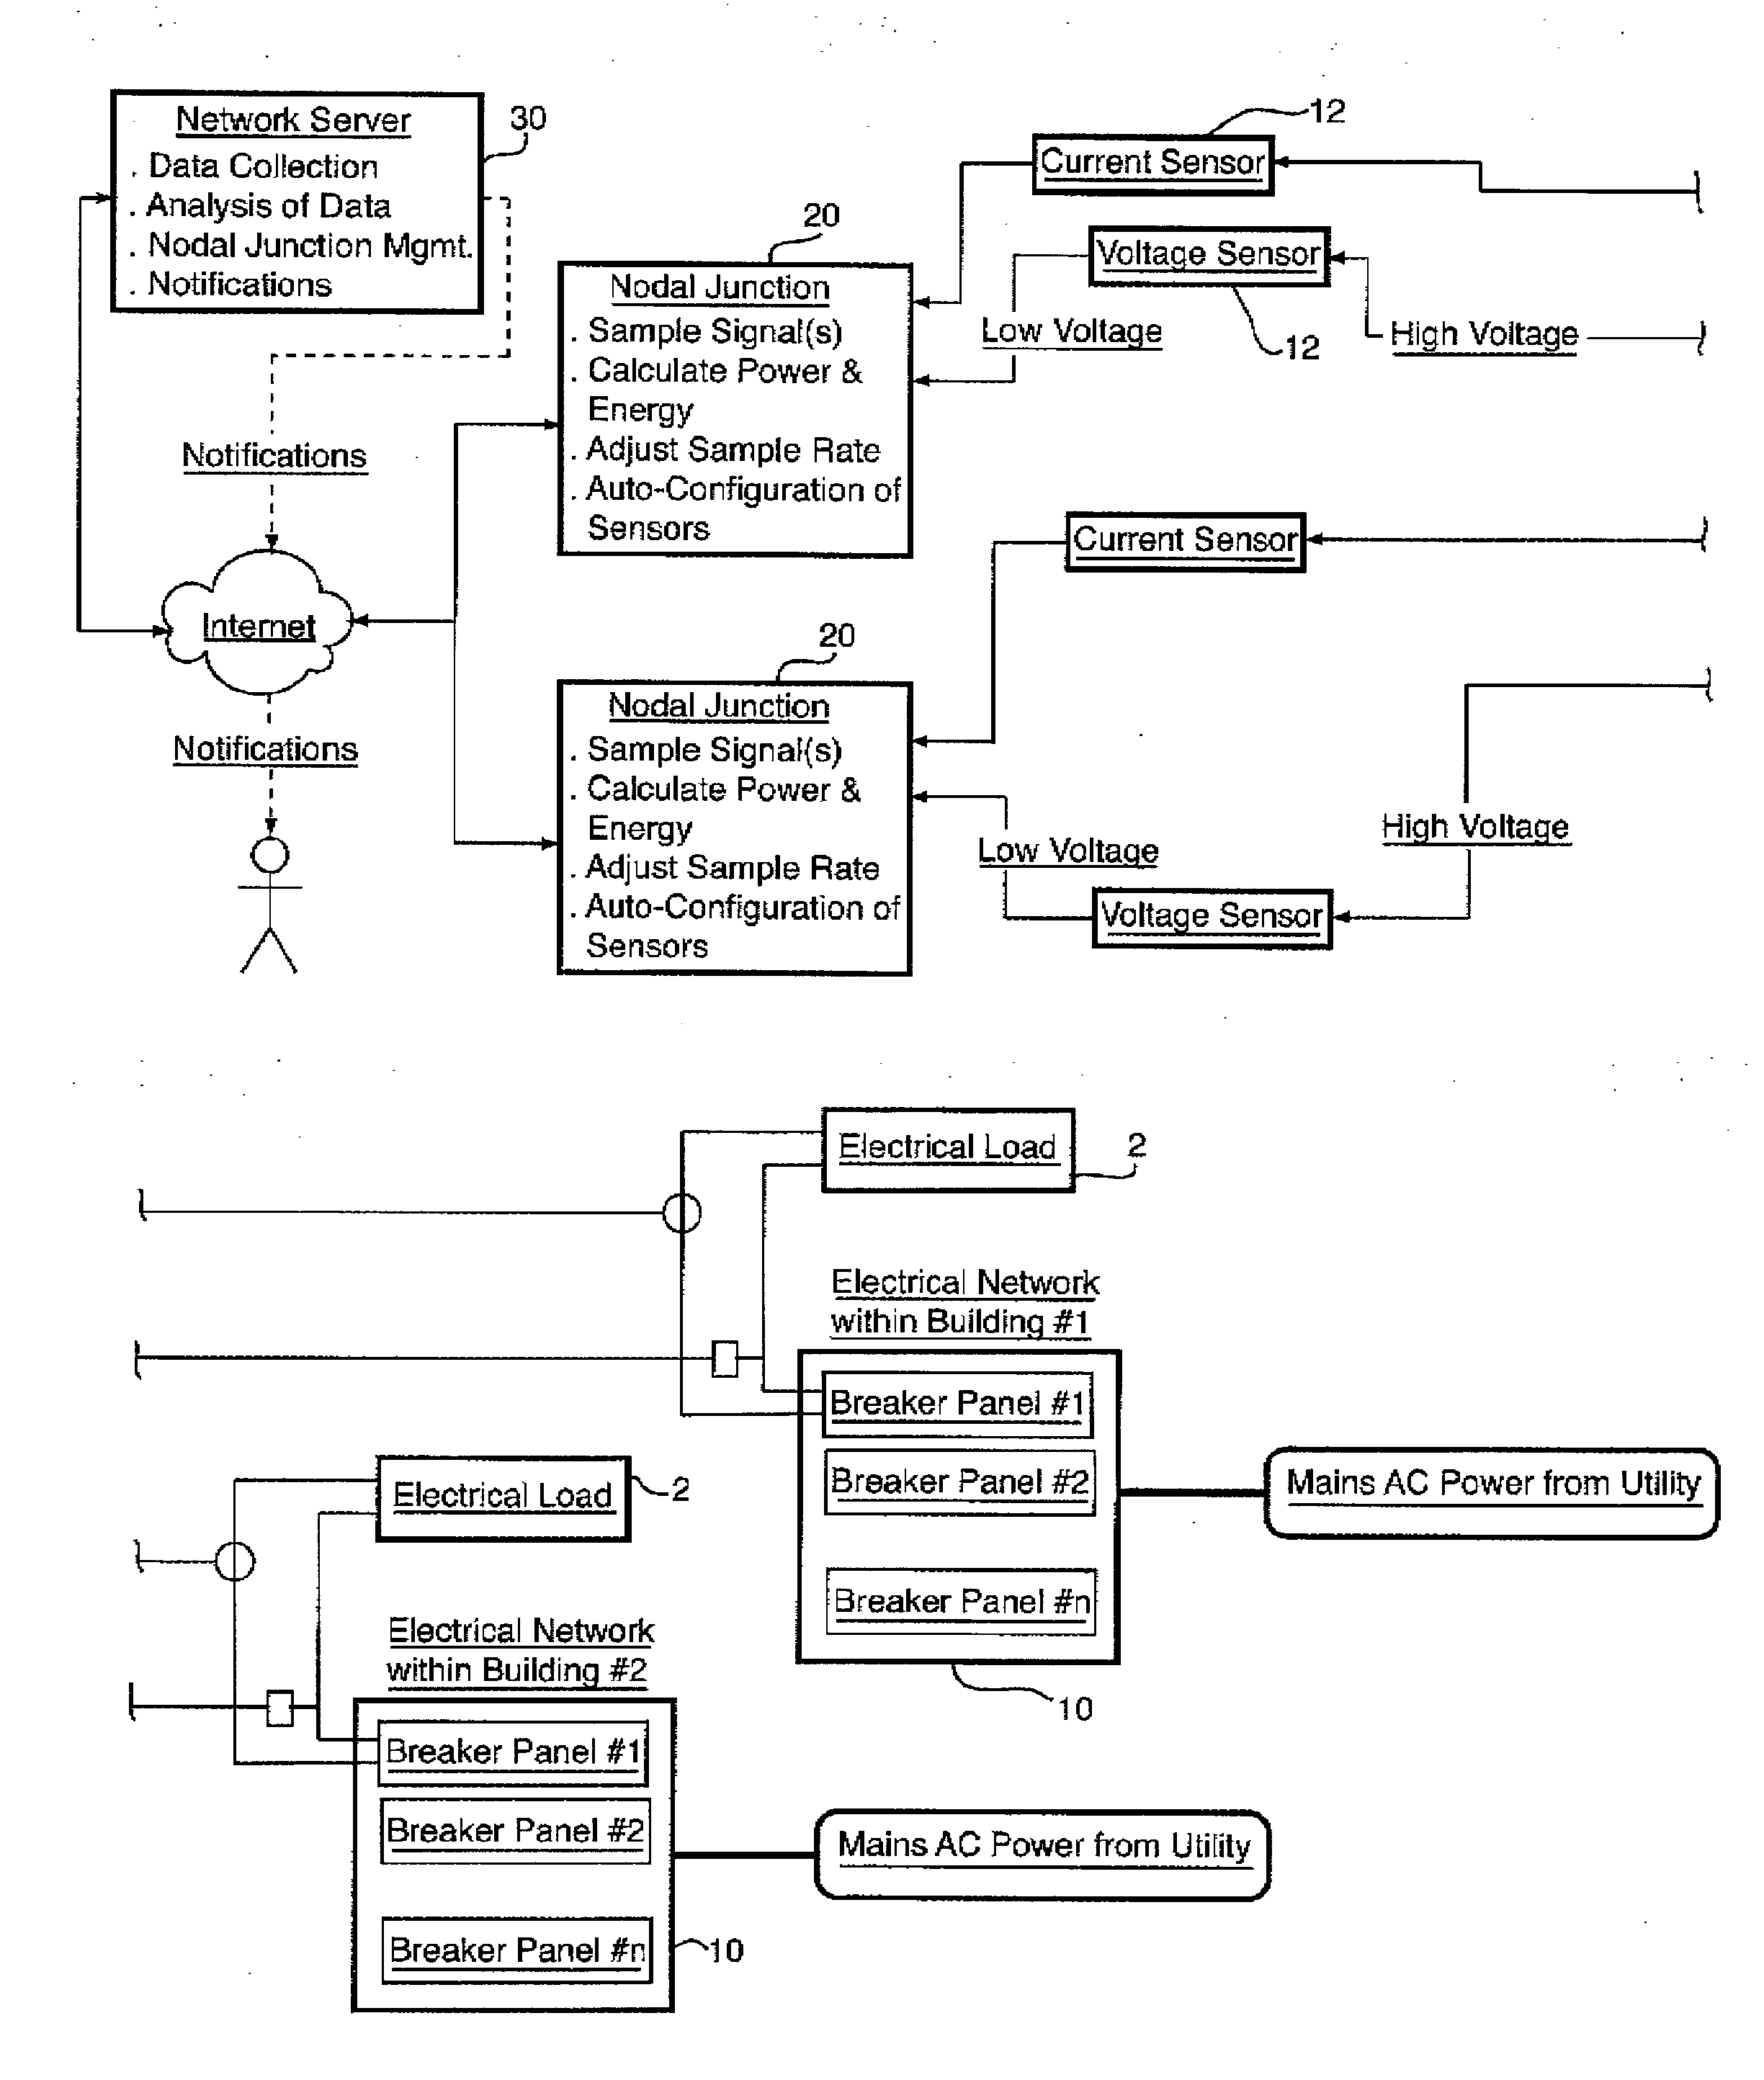 System and method for monitoring an electrical network